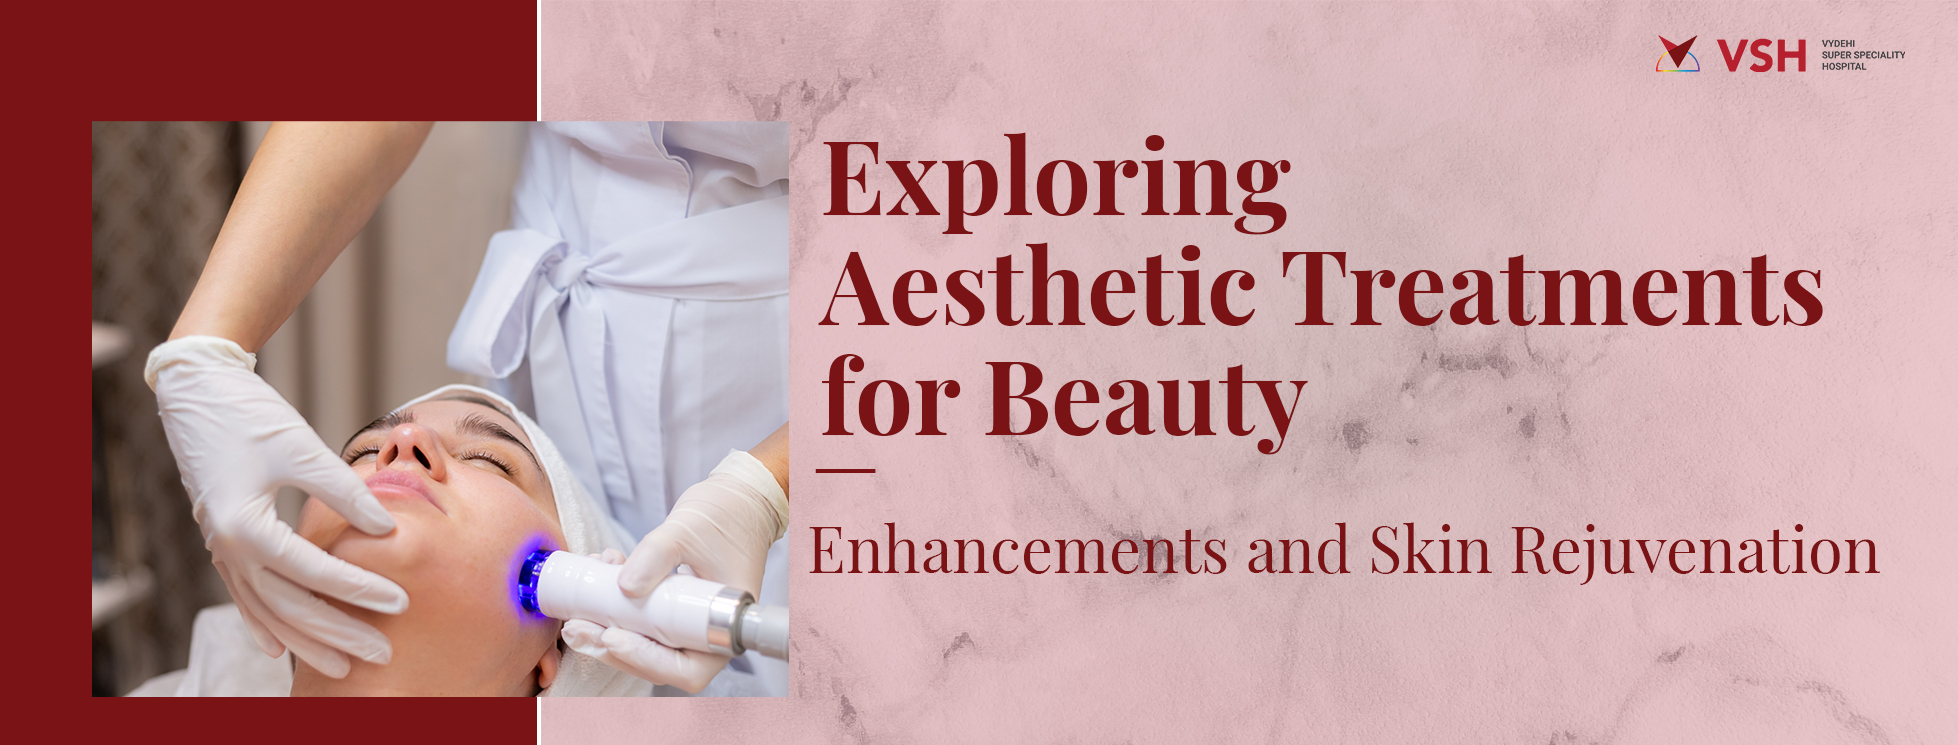 Exploring Aesthetic Treatments for Beauty Enhancements and Skin Rejuvenation